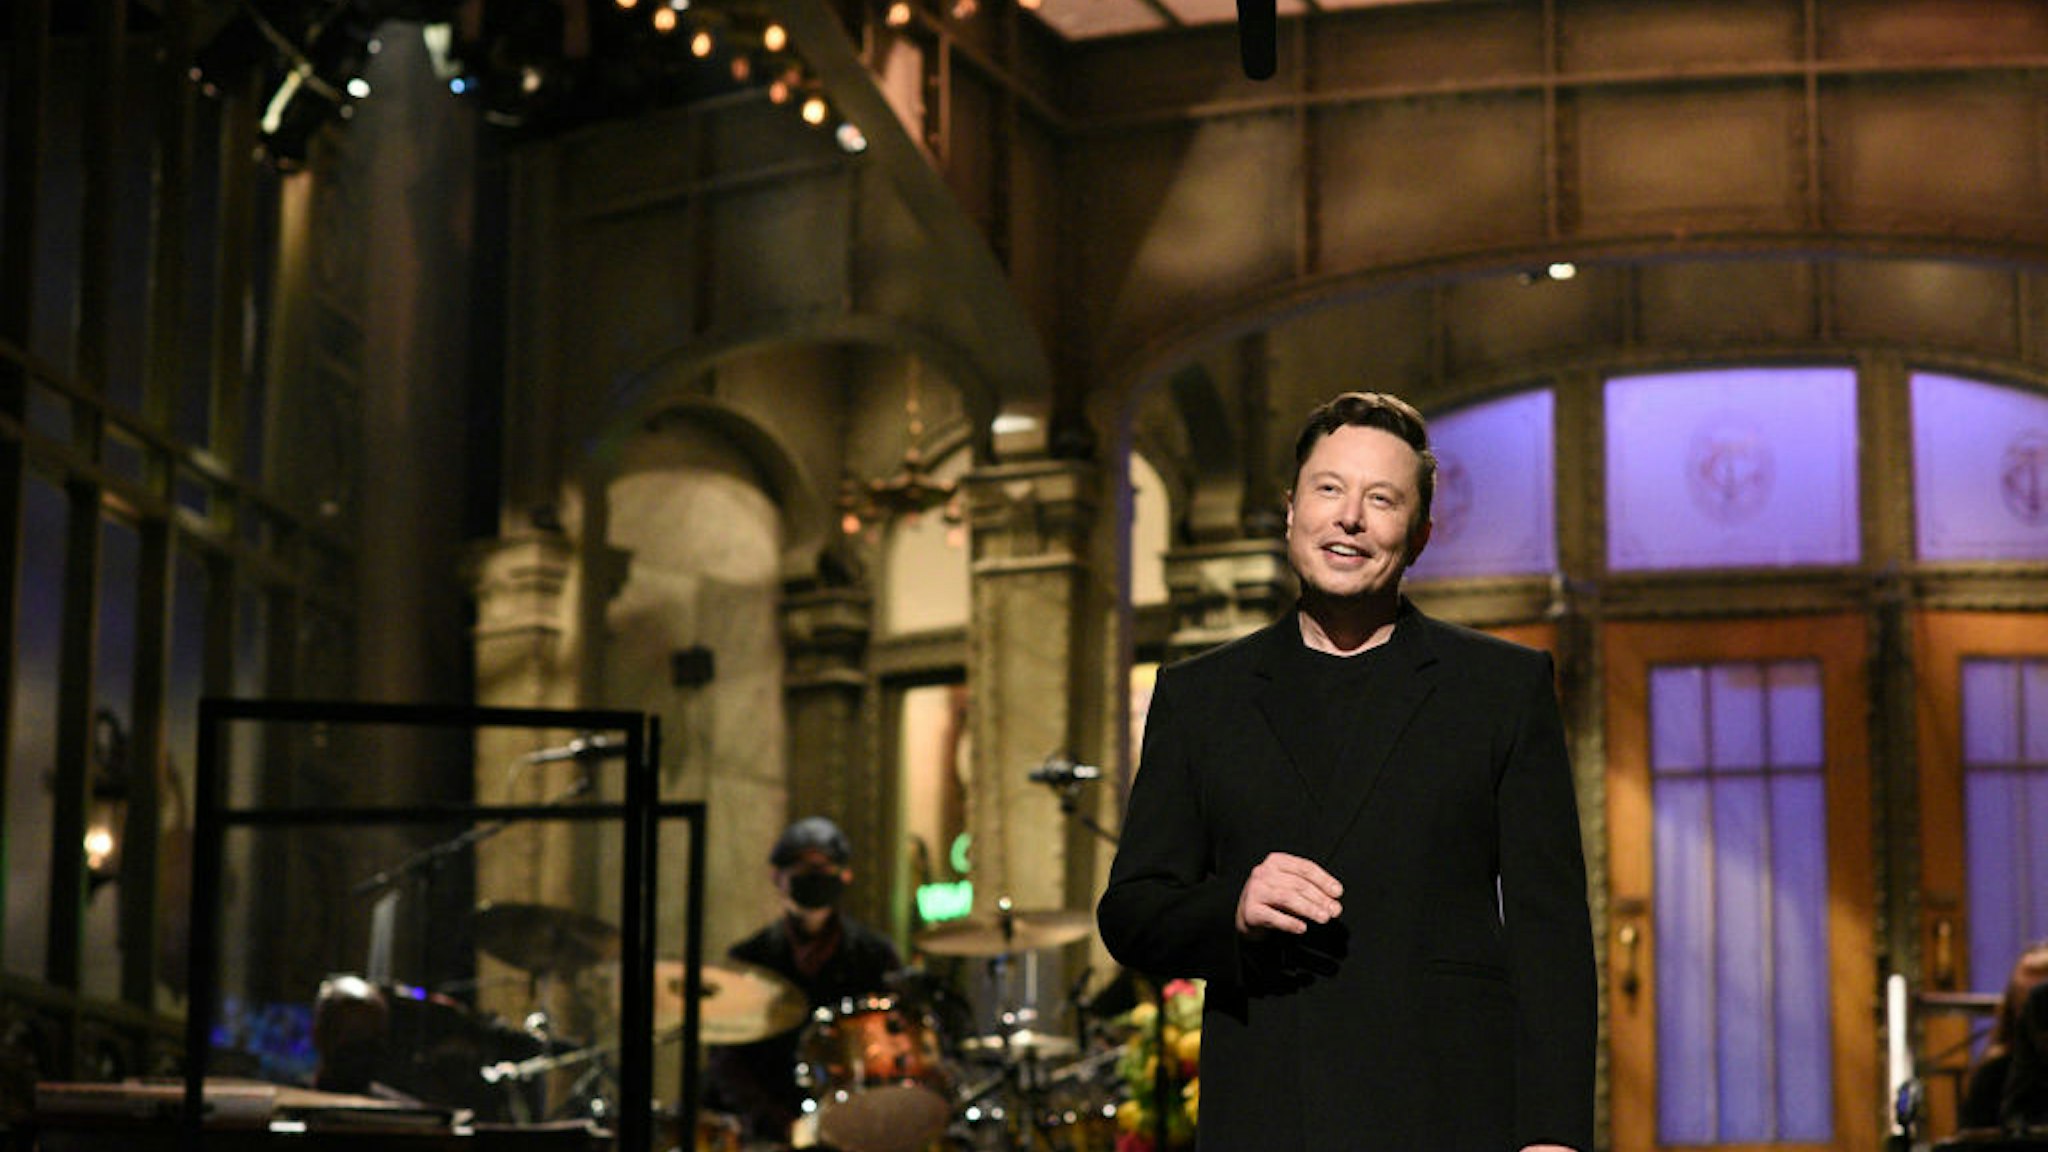 SATURDAY NIGHT LIVE -- "Elon Musk" Episode 1803 -- Pictured: Host Elon Musk during the monologue on Saturday, May 8, 2021 -- (Photo By: Will Heath/NBC/NBCU Photo Bank via Getty Images)